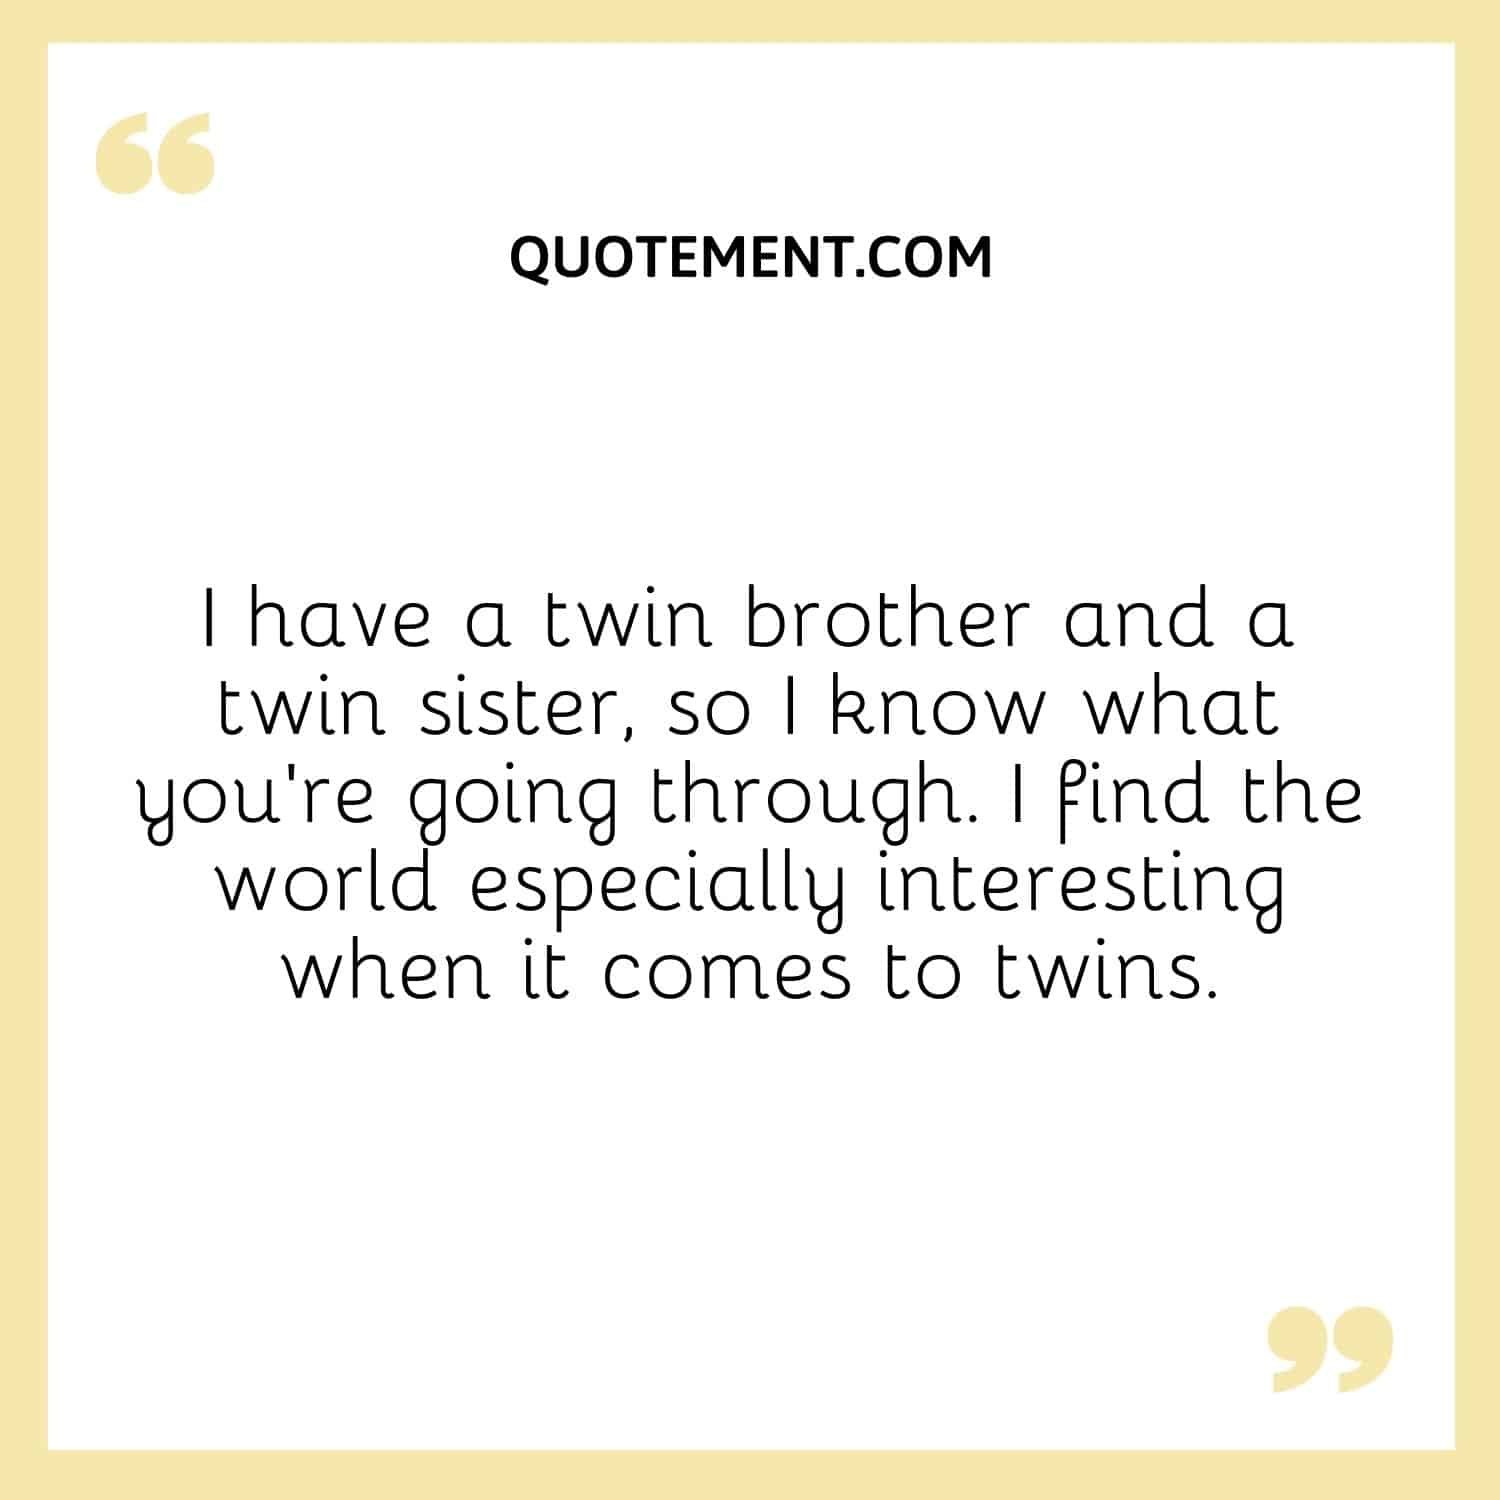 I have a twin brother and a twin sister